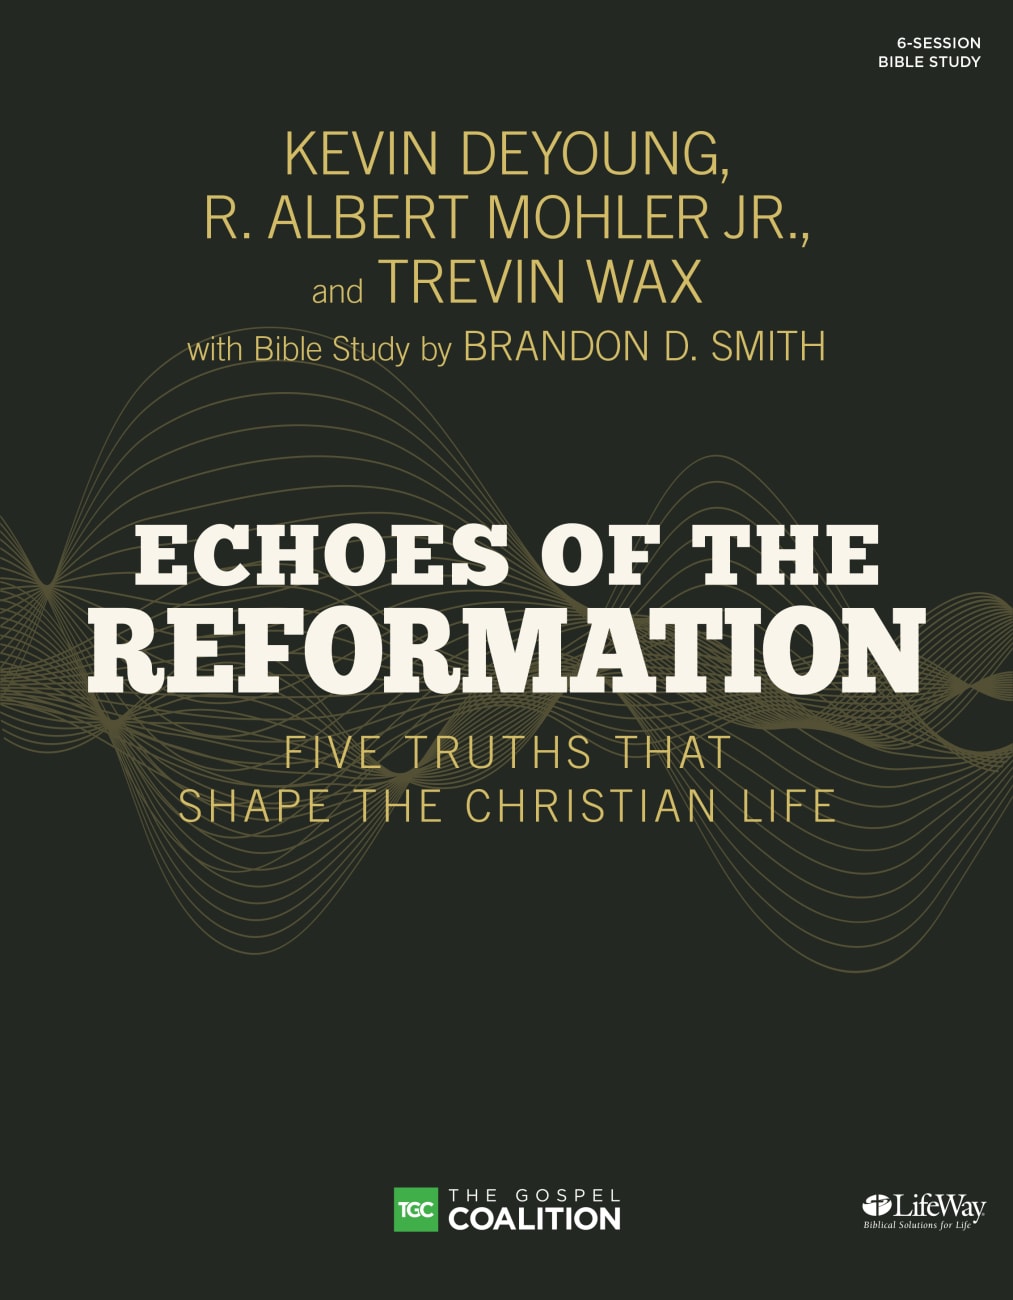 Echoes of the Reformations: Five Truths That Shape the Christian Life (Bible Study Book) Paperback